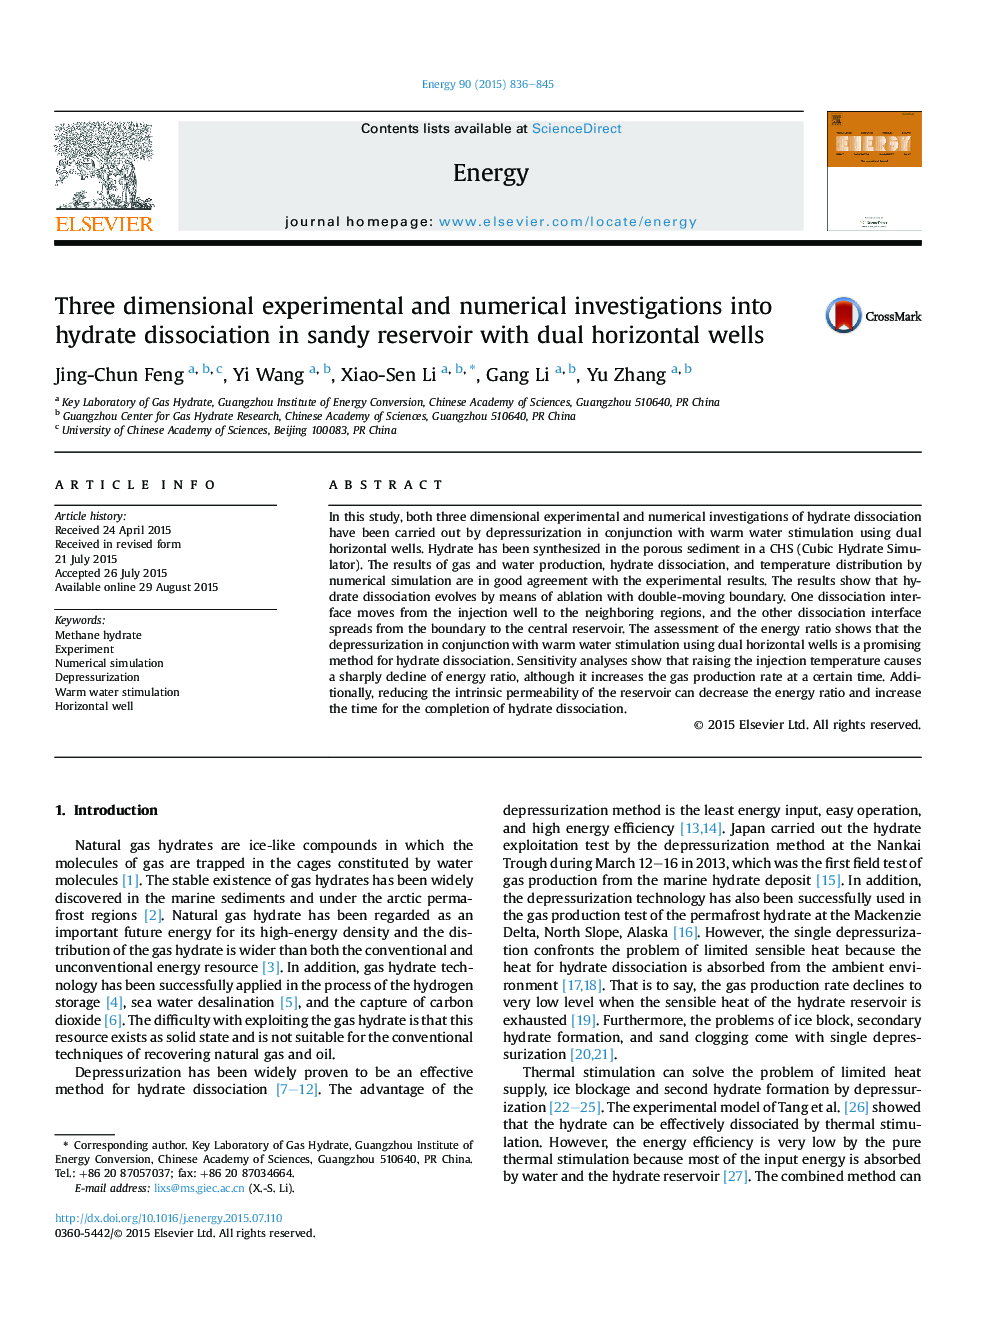 Three dimensional experimental and numerical investigations into hydrate dissociation in sandy reservoir with dual horizontal wells